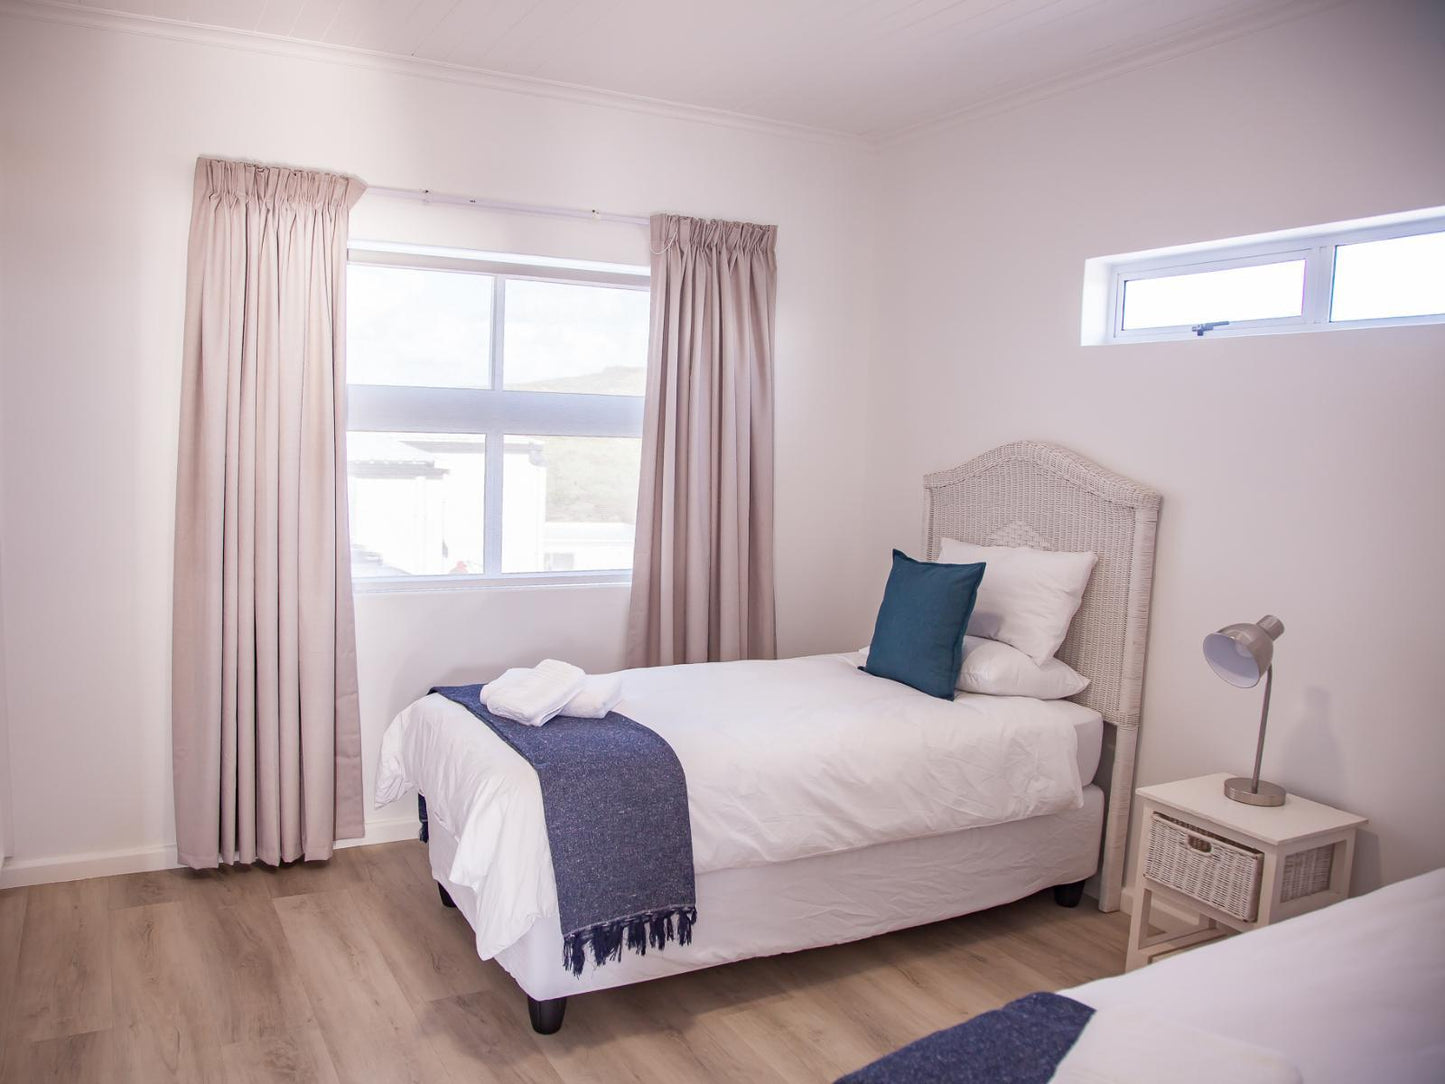 3 Bedroom Apartments @ Simply Yzer Self Catering Apartments